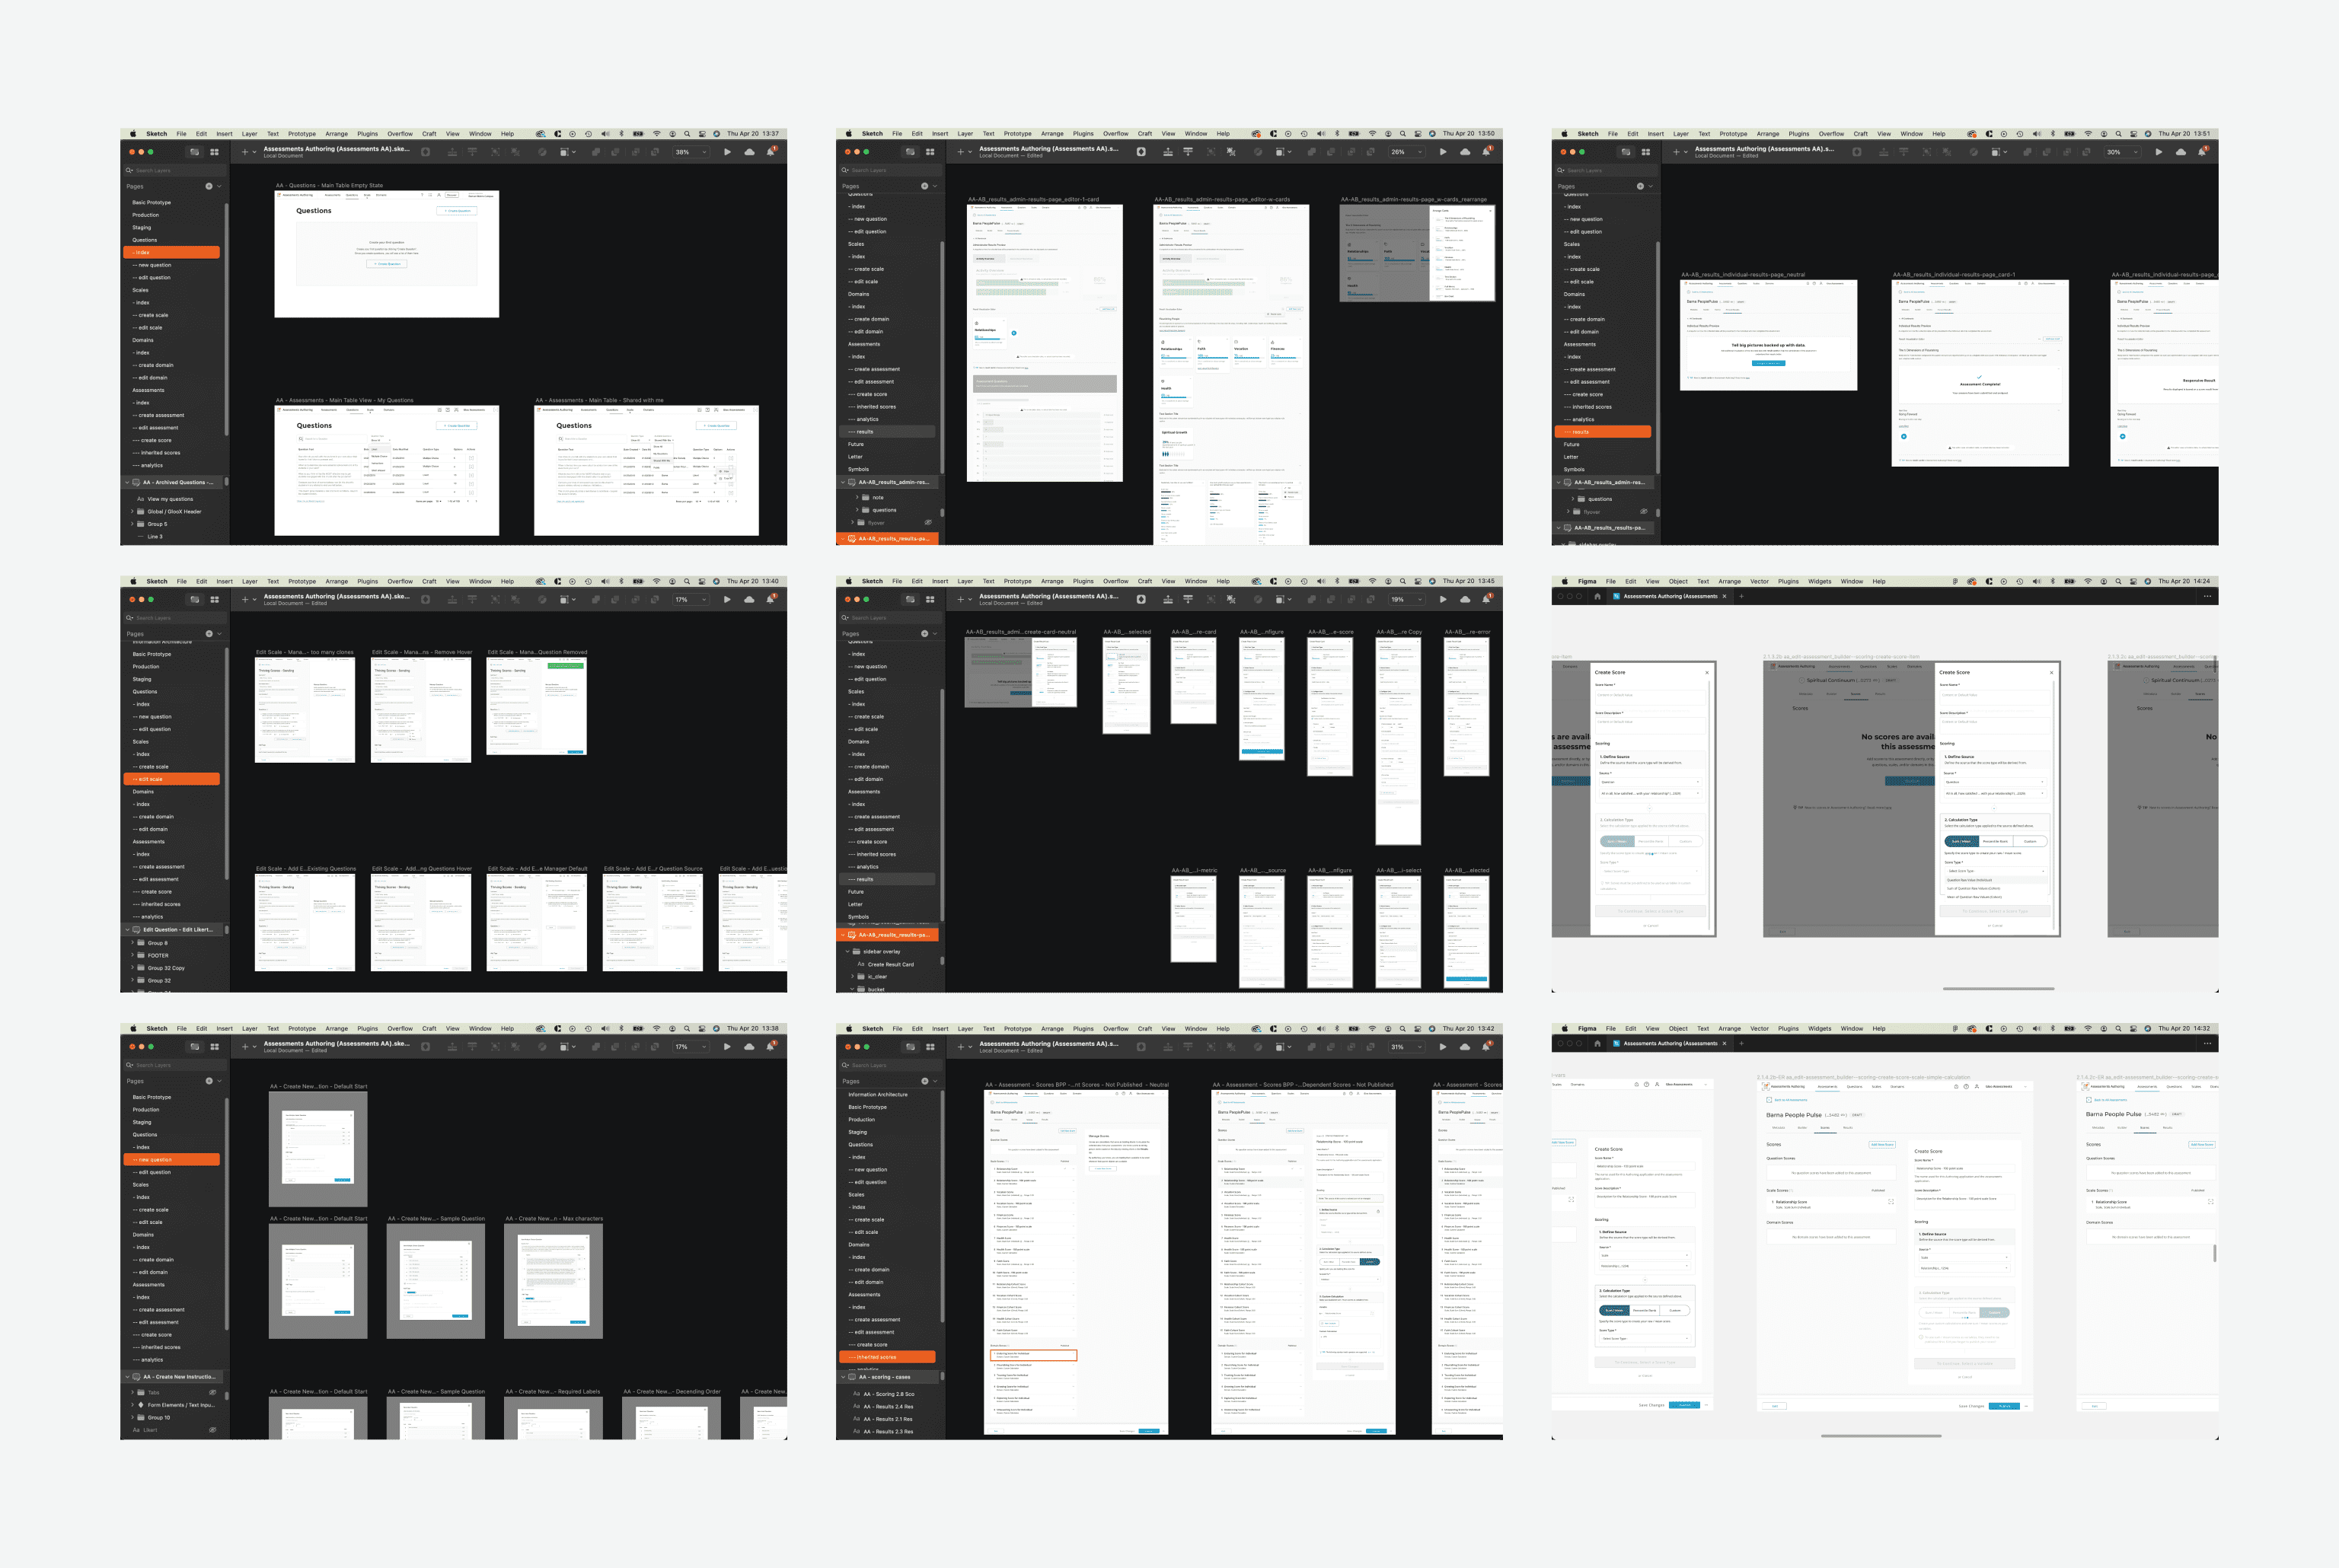 Design exploration for different content modules for Assessement Authoring tool